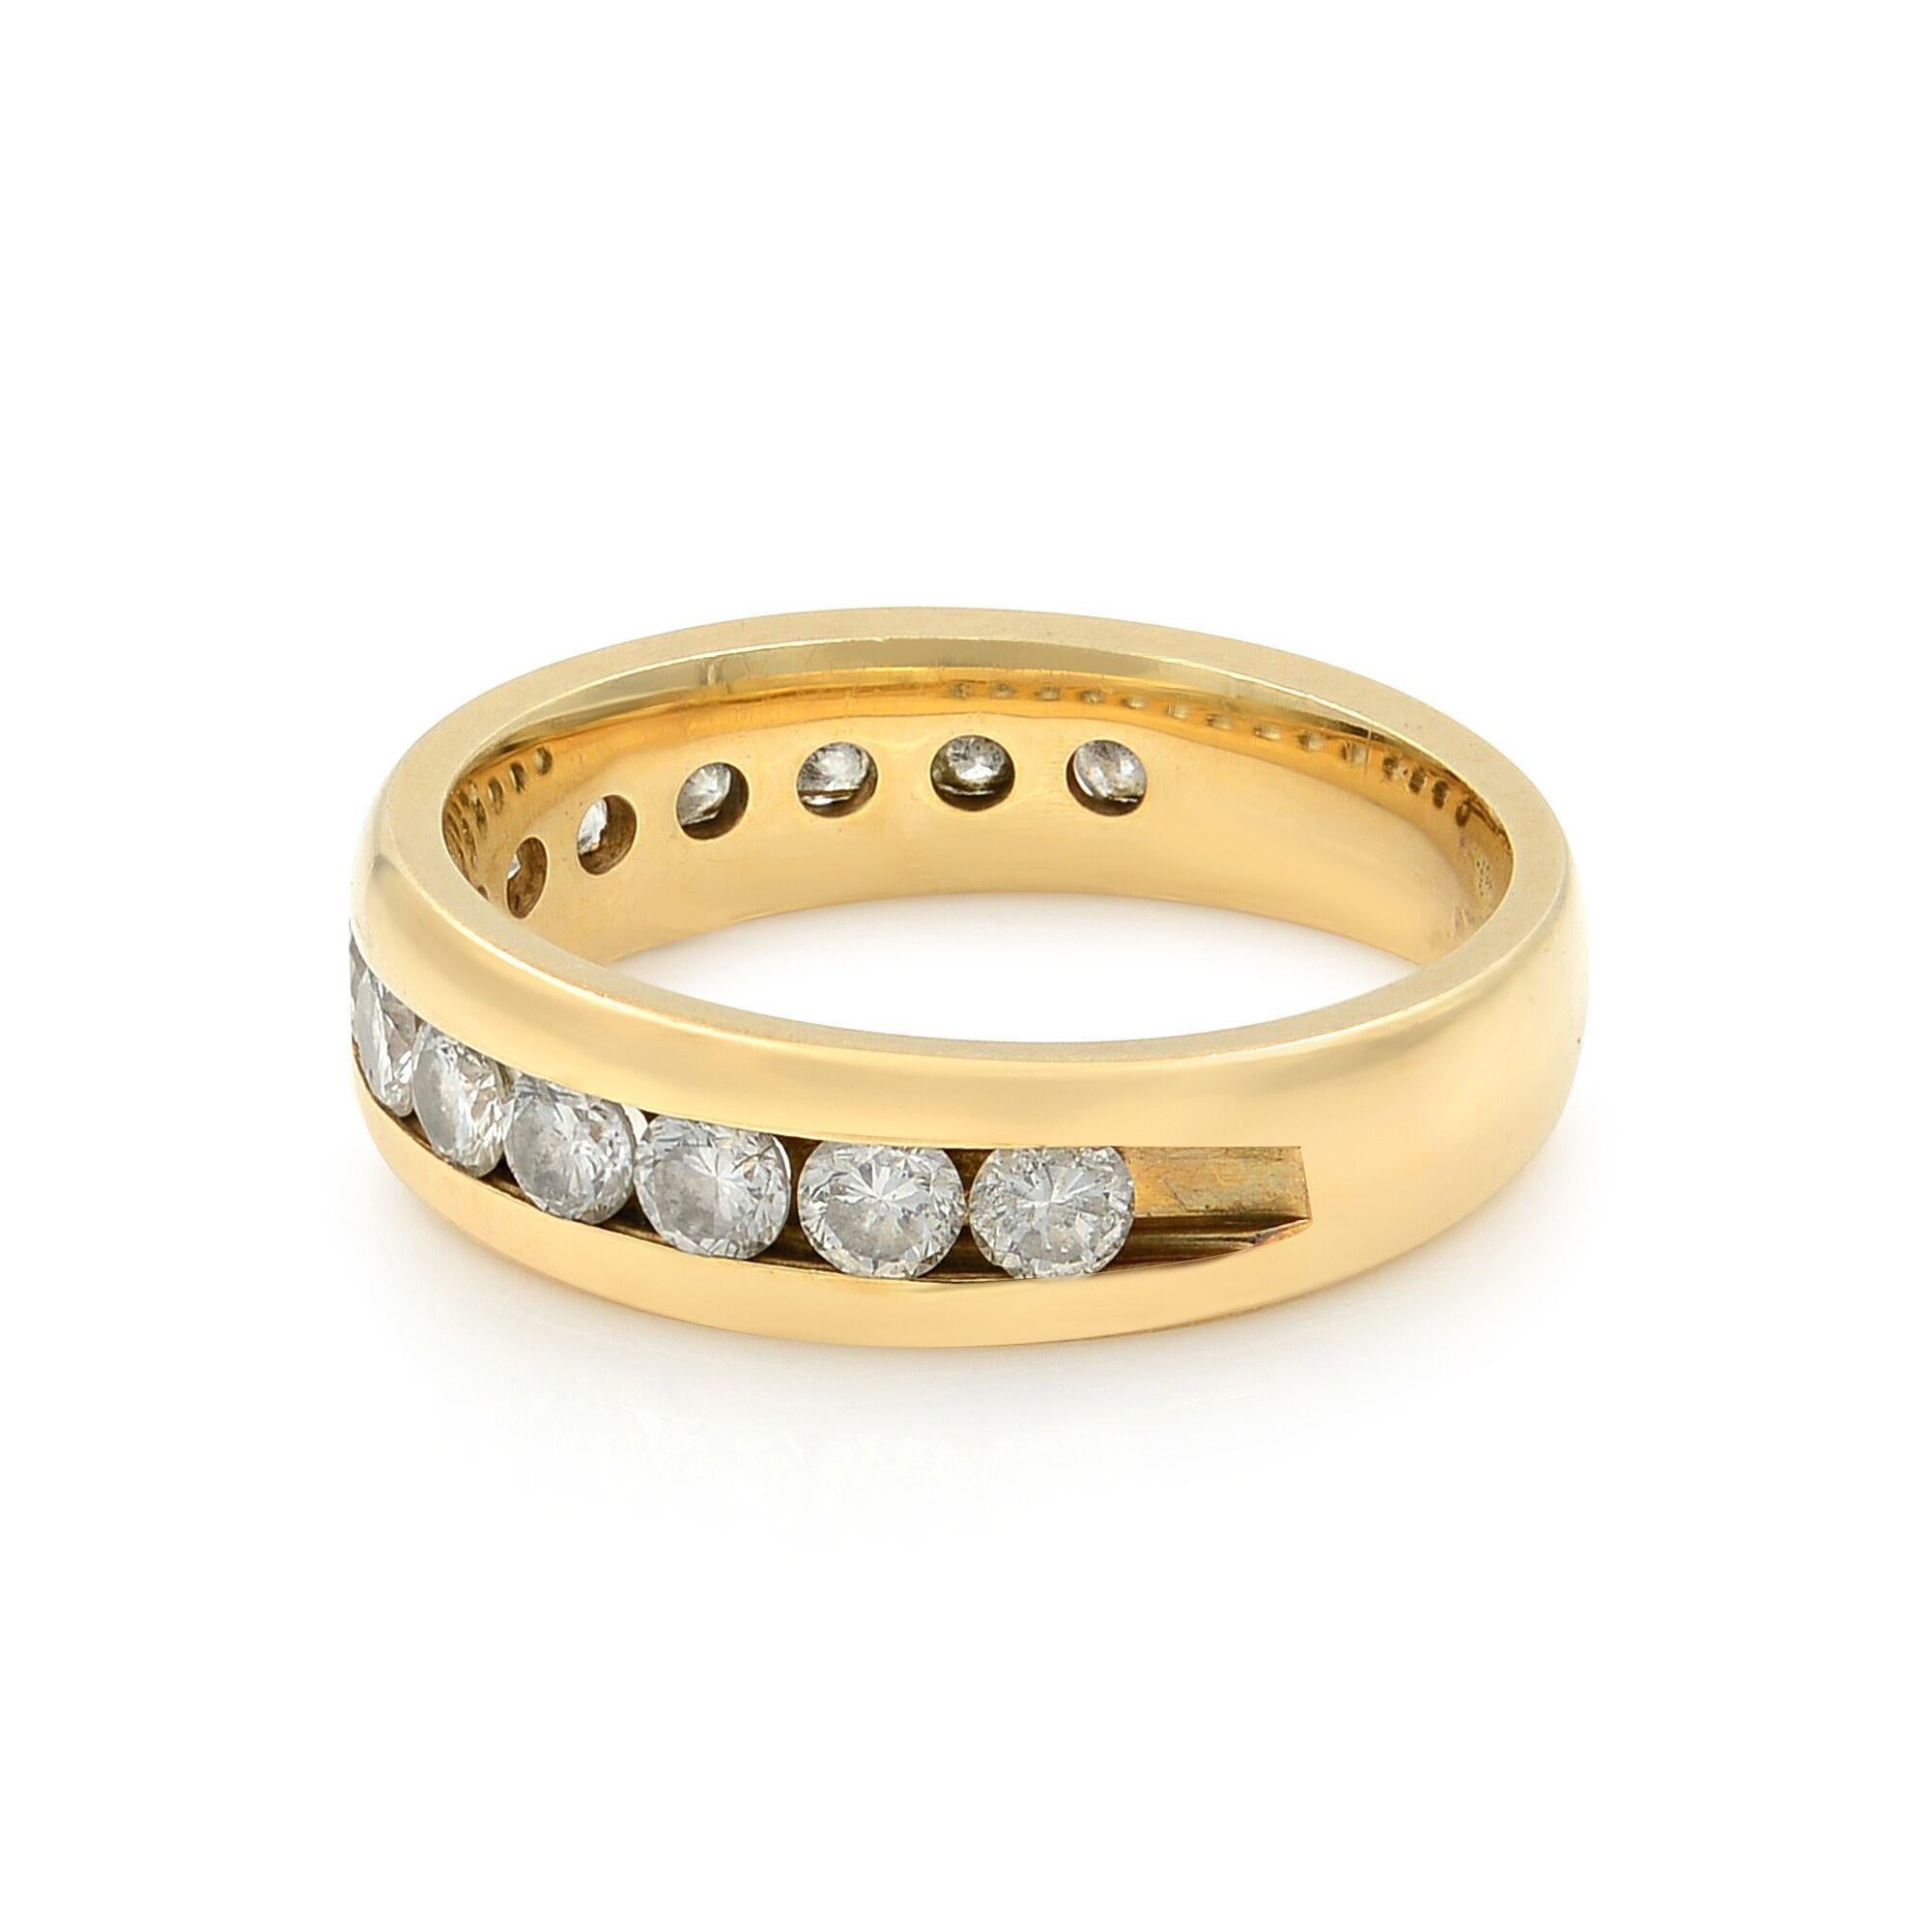 This beautiful diamond wedding ring band is crafted in 14K yellow gold. It features 14 sparkling channel set round cut diamonds with a total weight of 0.56 carats. Total weight: 4.5 grams. Ring width: 5 mm. Ring size 6. Comes with a presentable gift